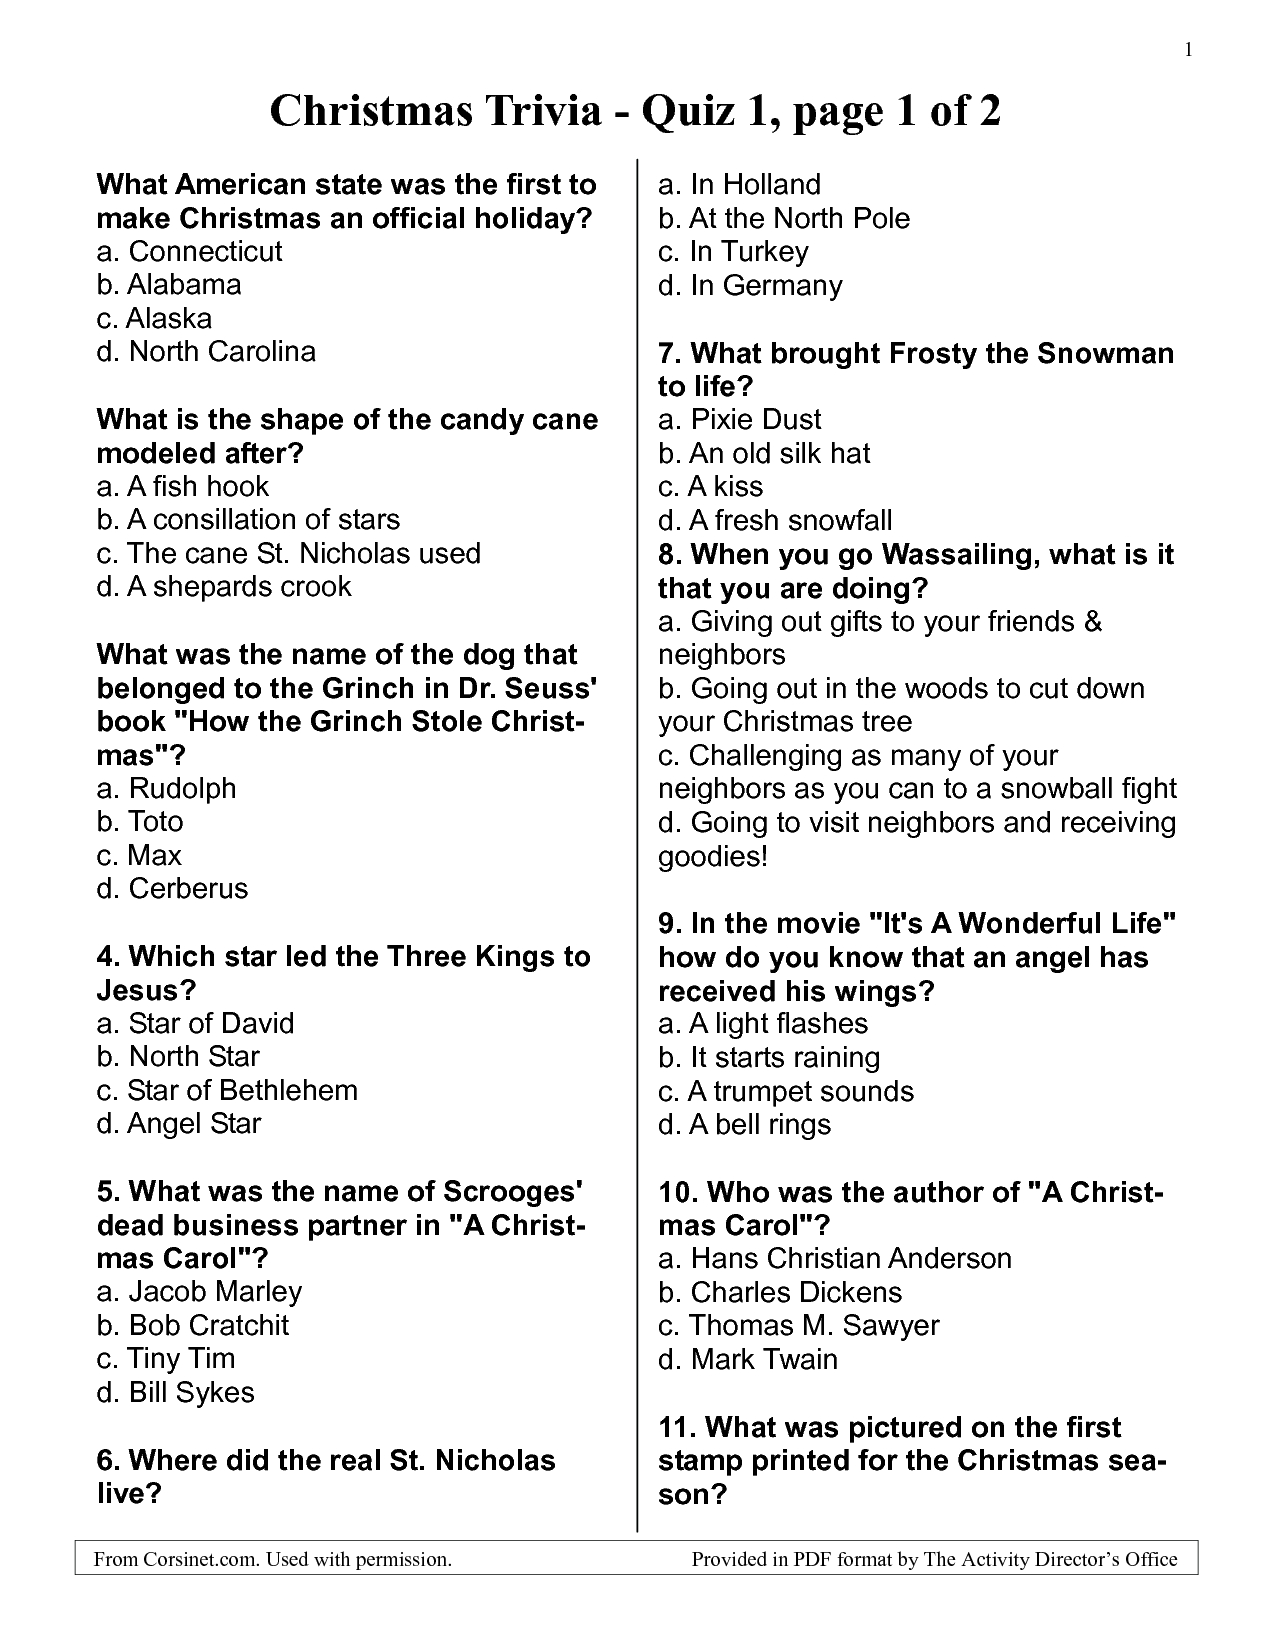 free-christmas-picture-quiz-questions-and-answers-printable-free